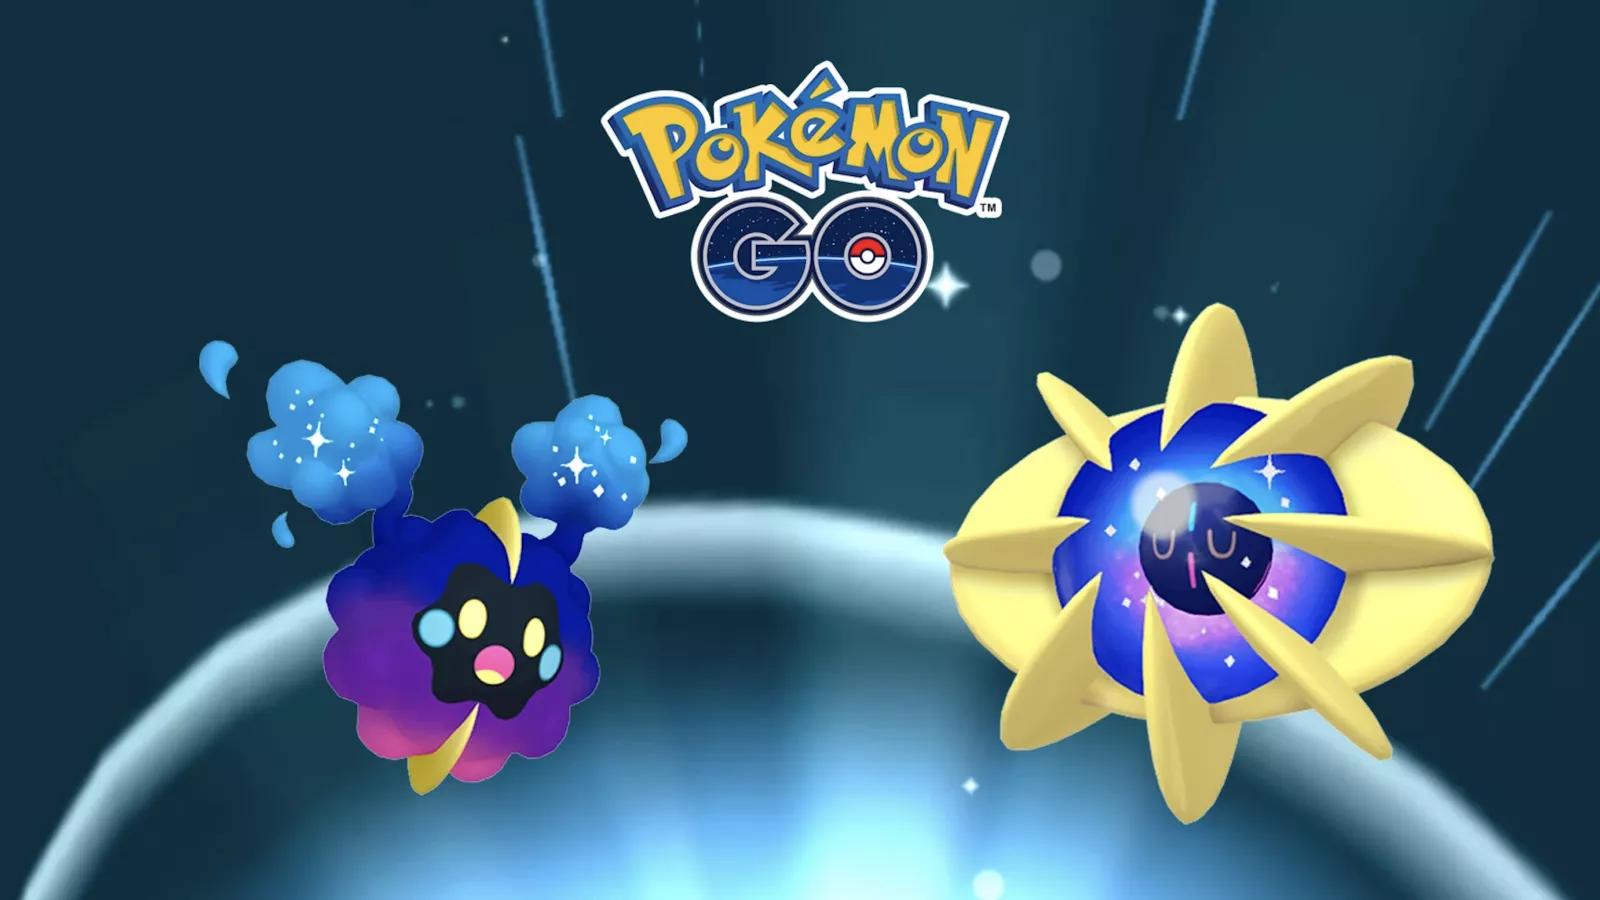 How do you find Cosmog in Pokemon Go? 